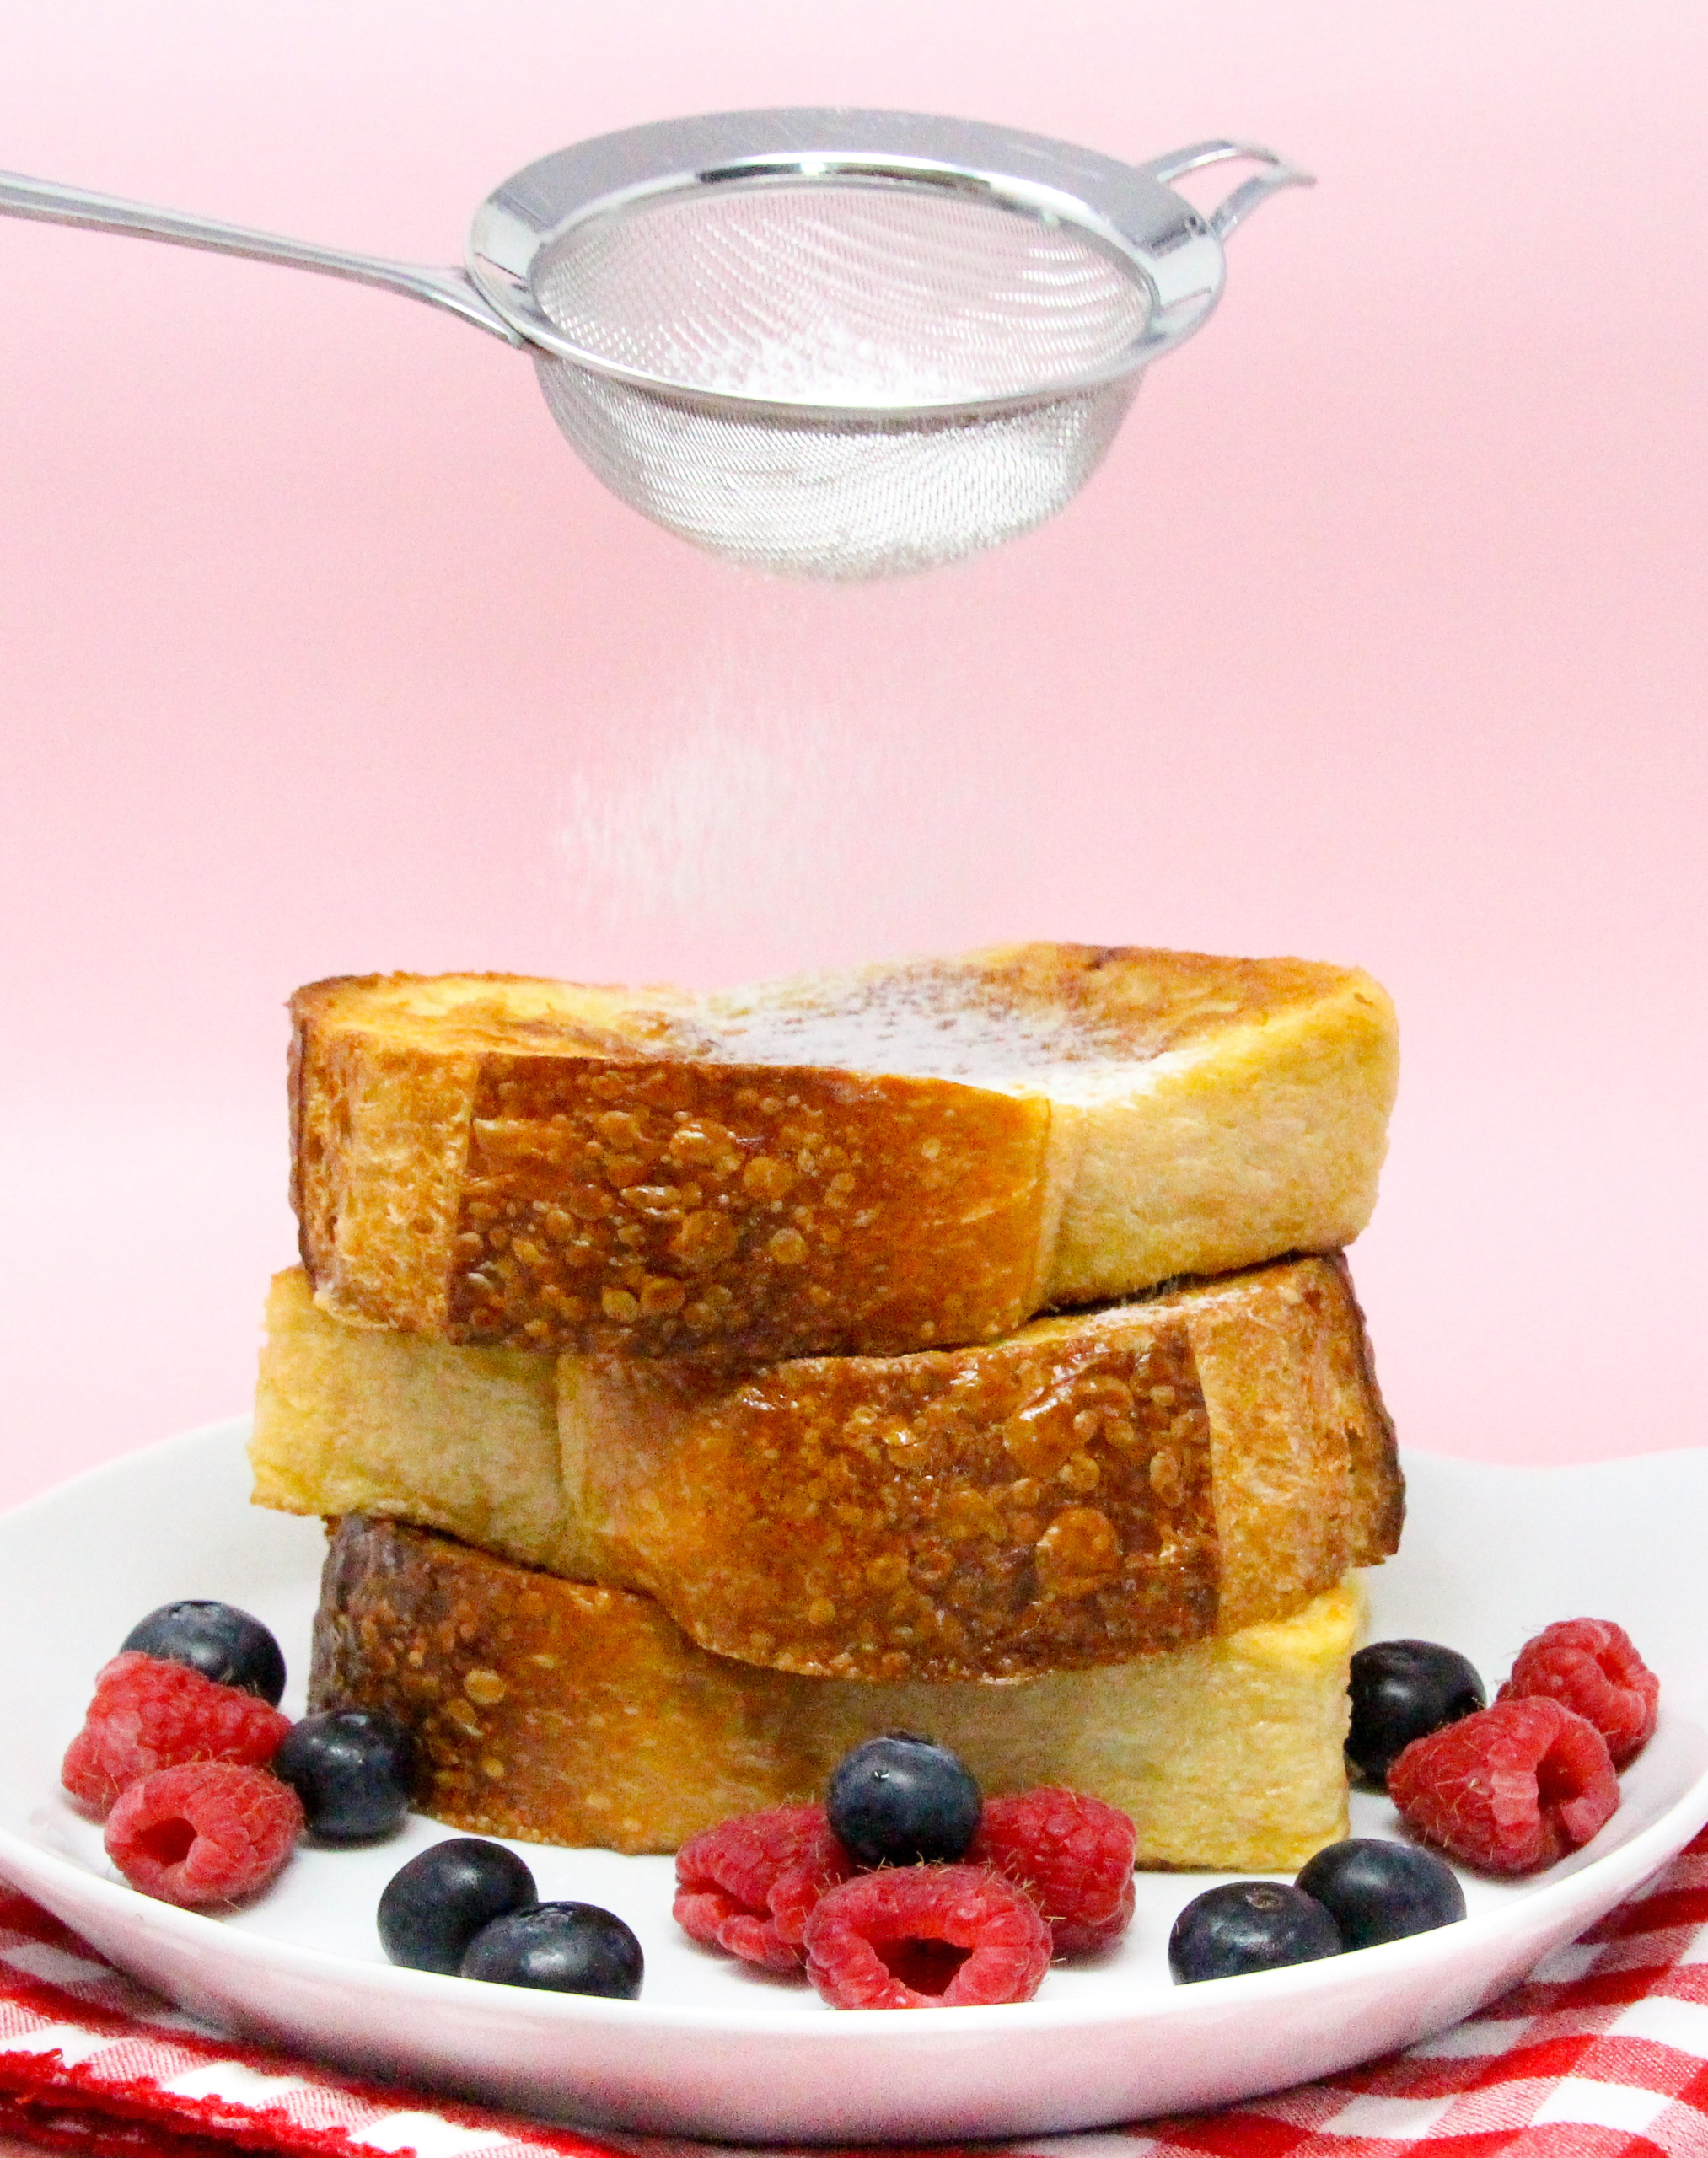 Honey-Ricotta-Stuffed French Toast starts with thick slabs of French bread then stuffed with a ricotta-based filling lightly sweetened with honey and a liberal amount of lemon zest for a tart tang. Recipe shared with permission granted by Jennie Marts, author of KILL OR BEE KILLED. 